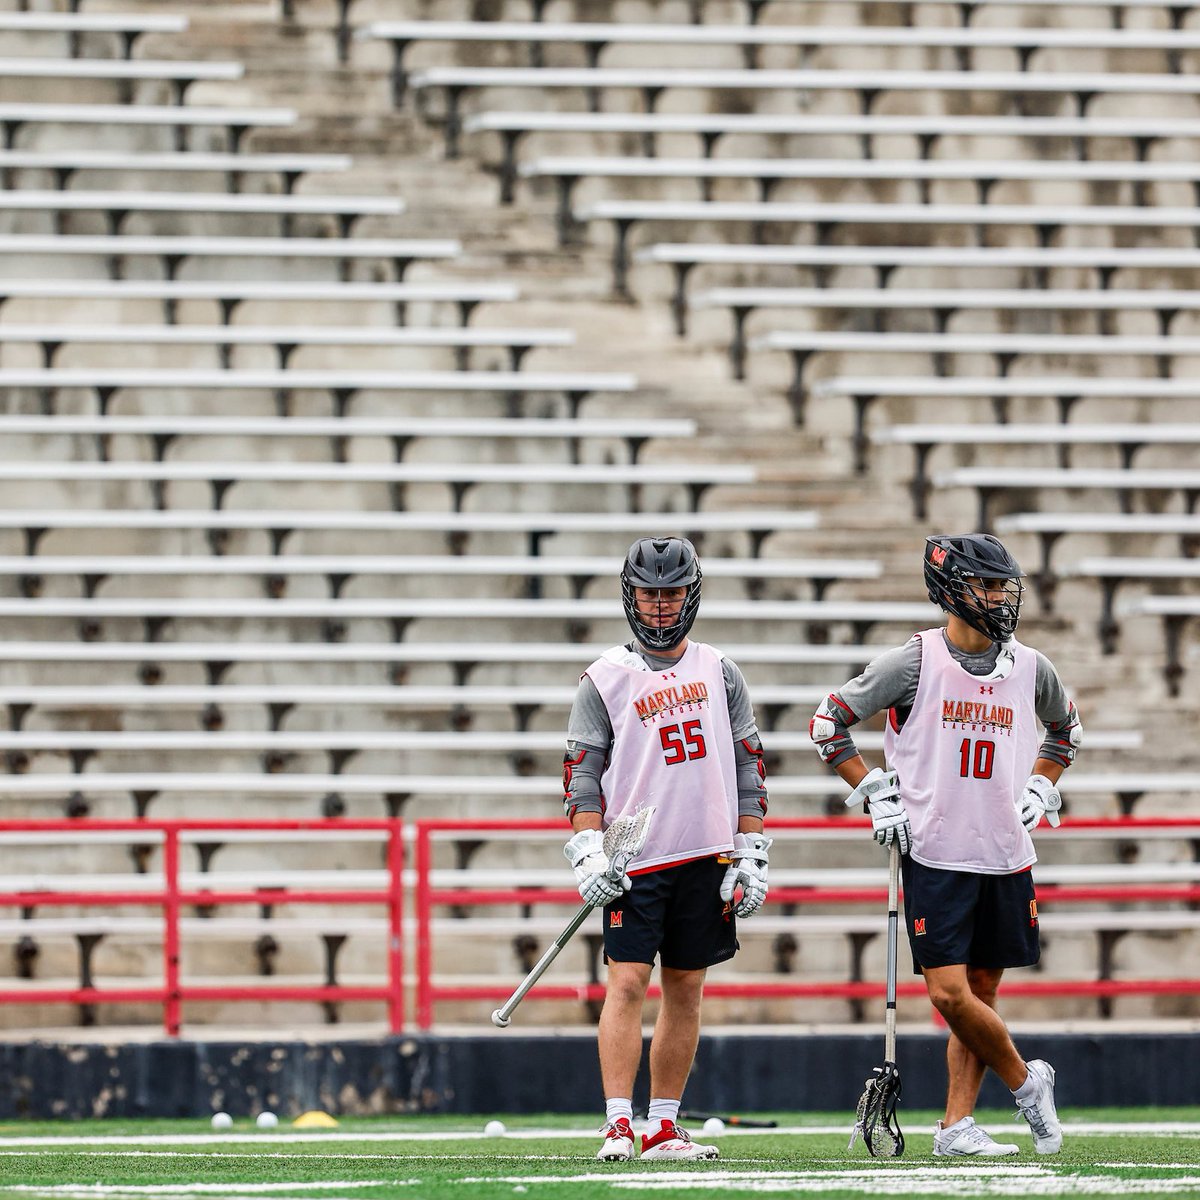 Almost May. No better time of year for lacrosse. #BeTheBest